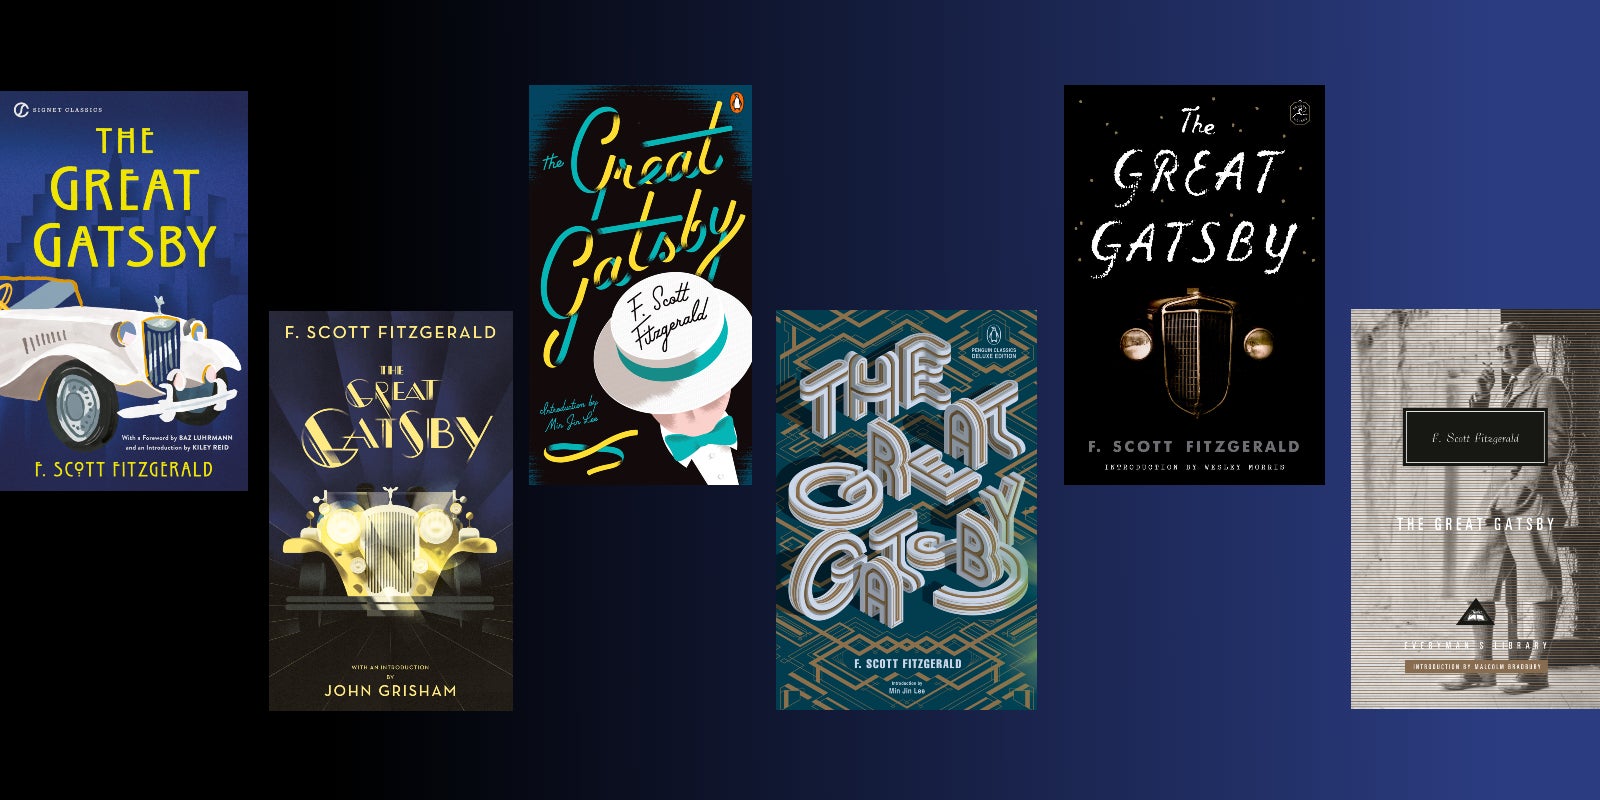 Introducing New Editions of <i>The Great Gatsby</i> from Penguin Random House